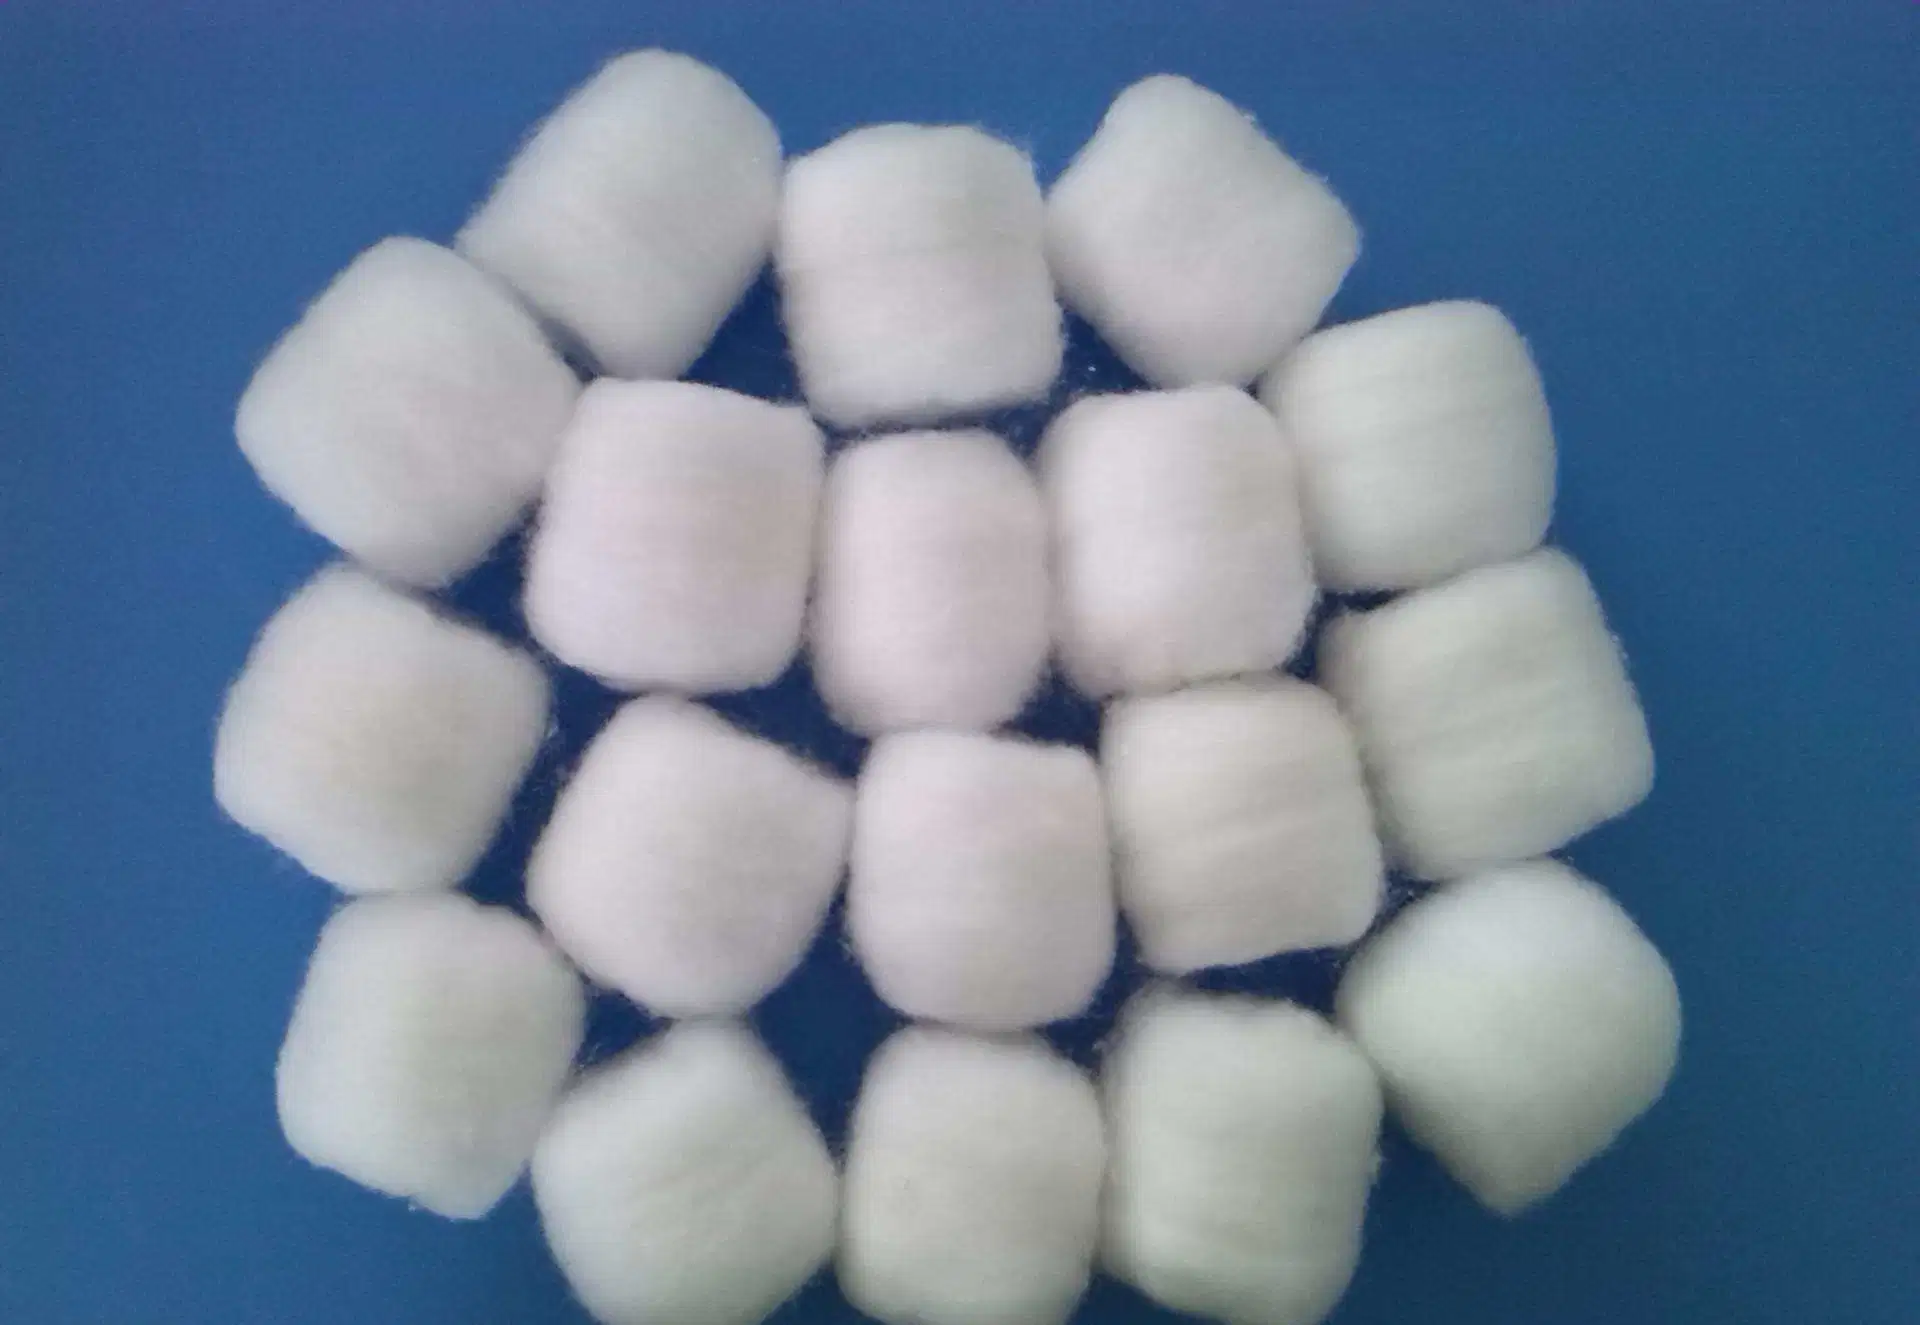 Sunmed Sterile/Non-Sterile Cotton Ball 1.0g, Different Weights Available, Cotton Ball, Medical Dressing